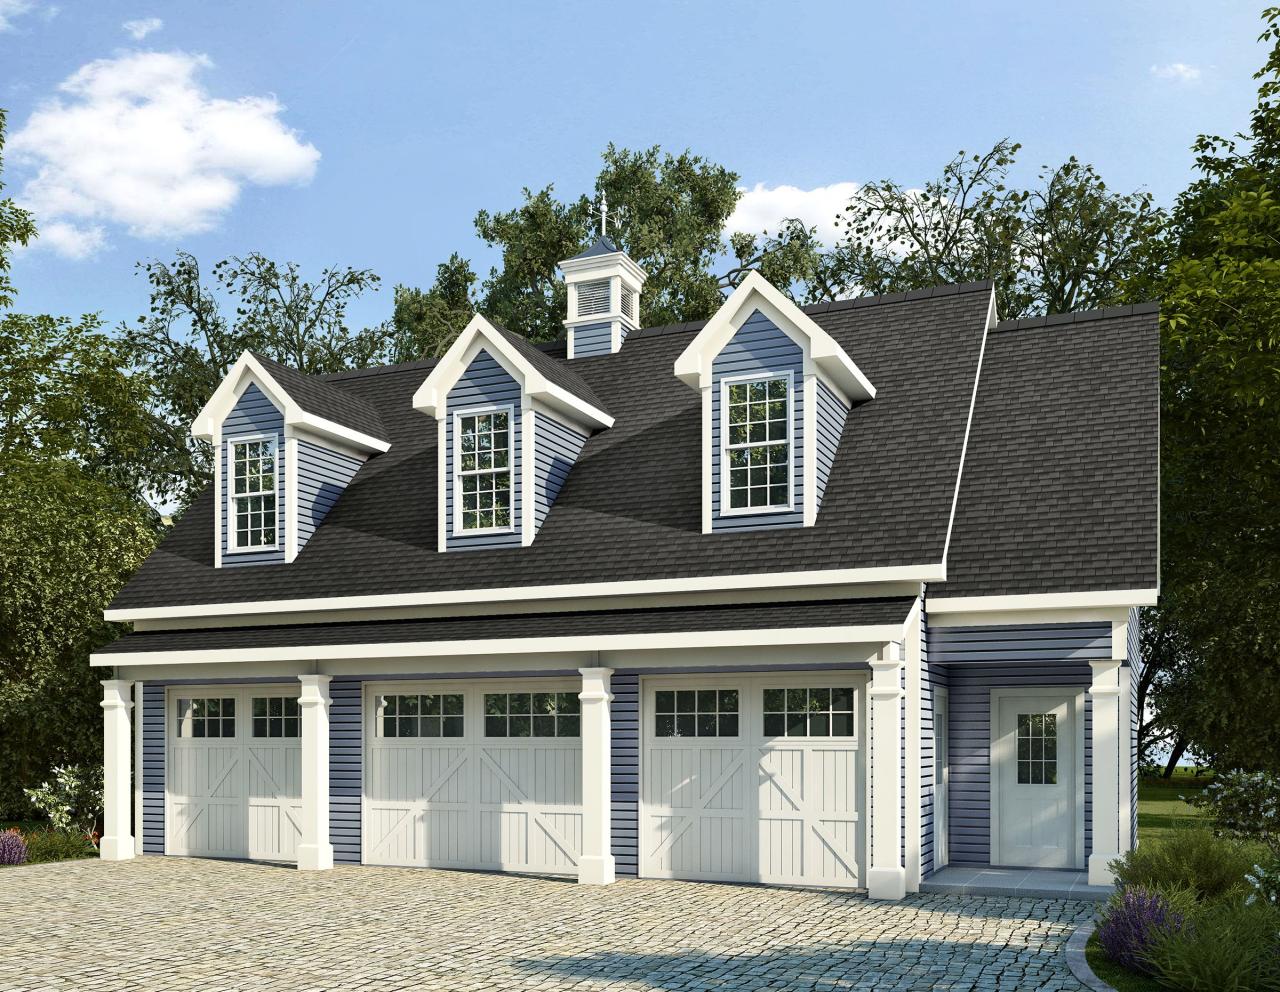 Plan 36058DK 3 Car Carriage House Plan with 3 Dormers Carriage house